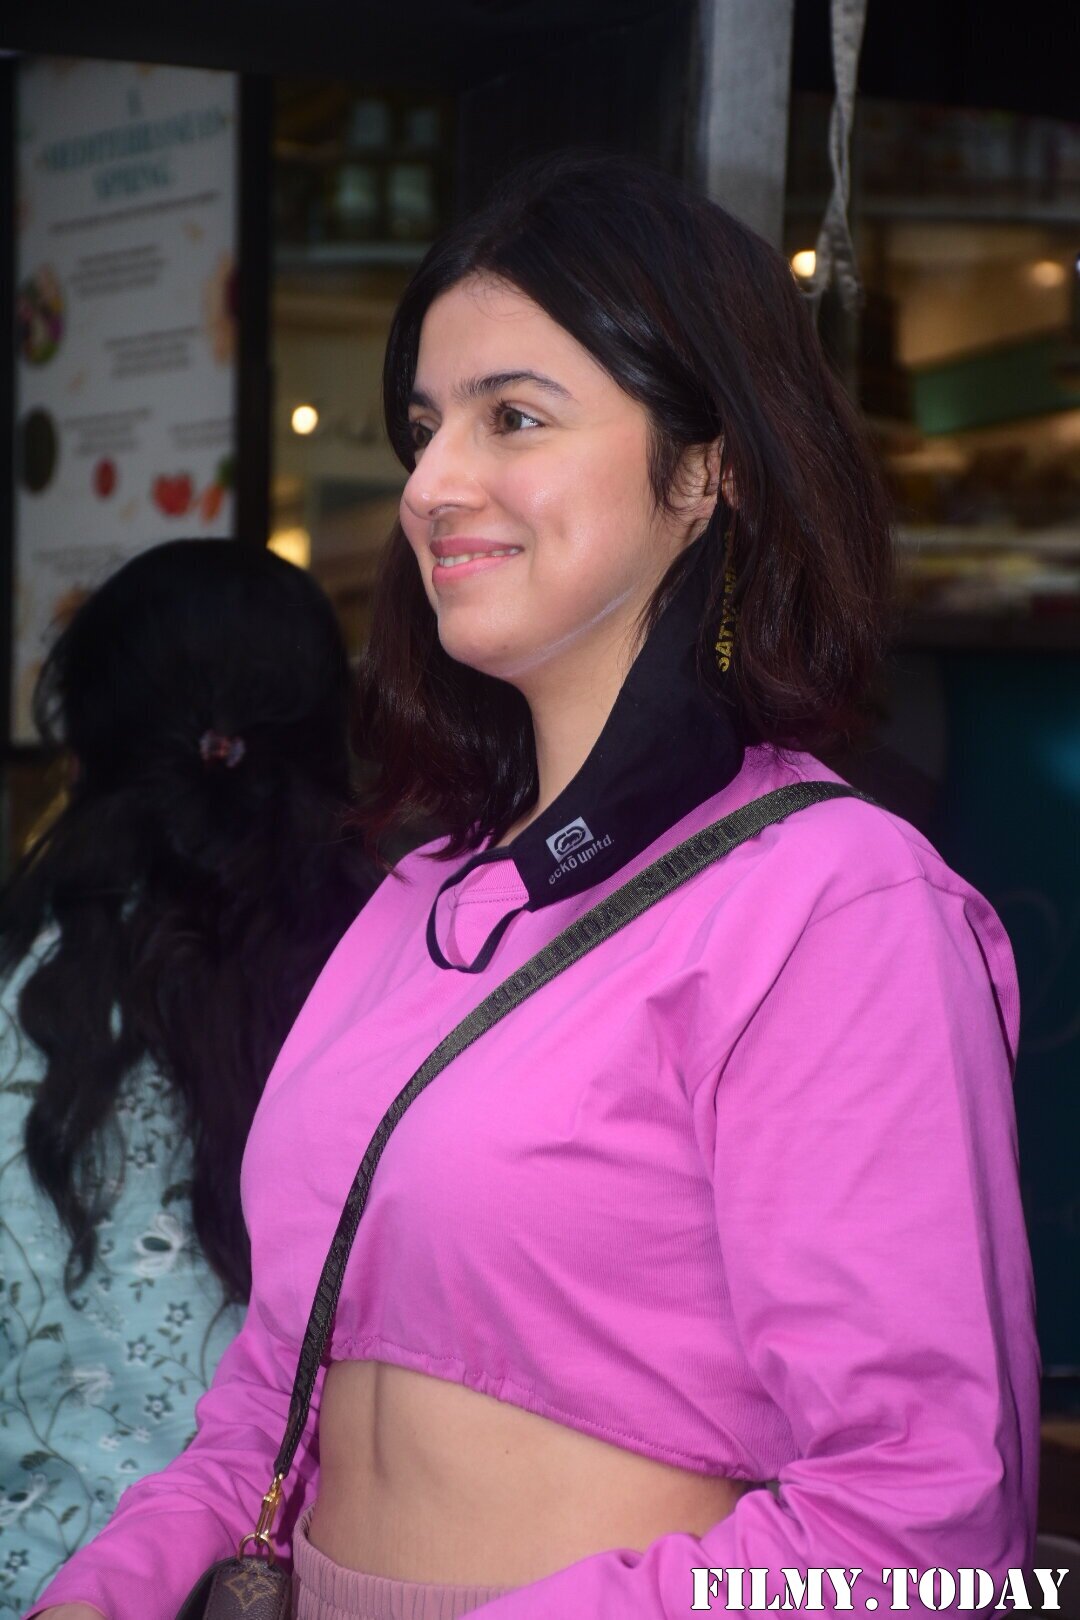 Divya Khosla - Photos: Celebs Spotted At Foodhall In Bandra | Picture 1780190